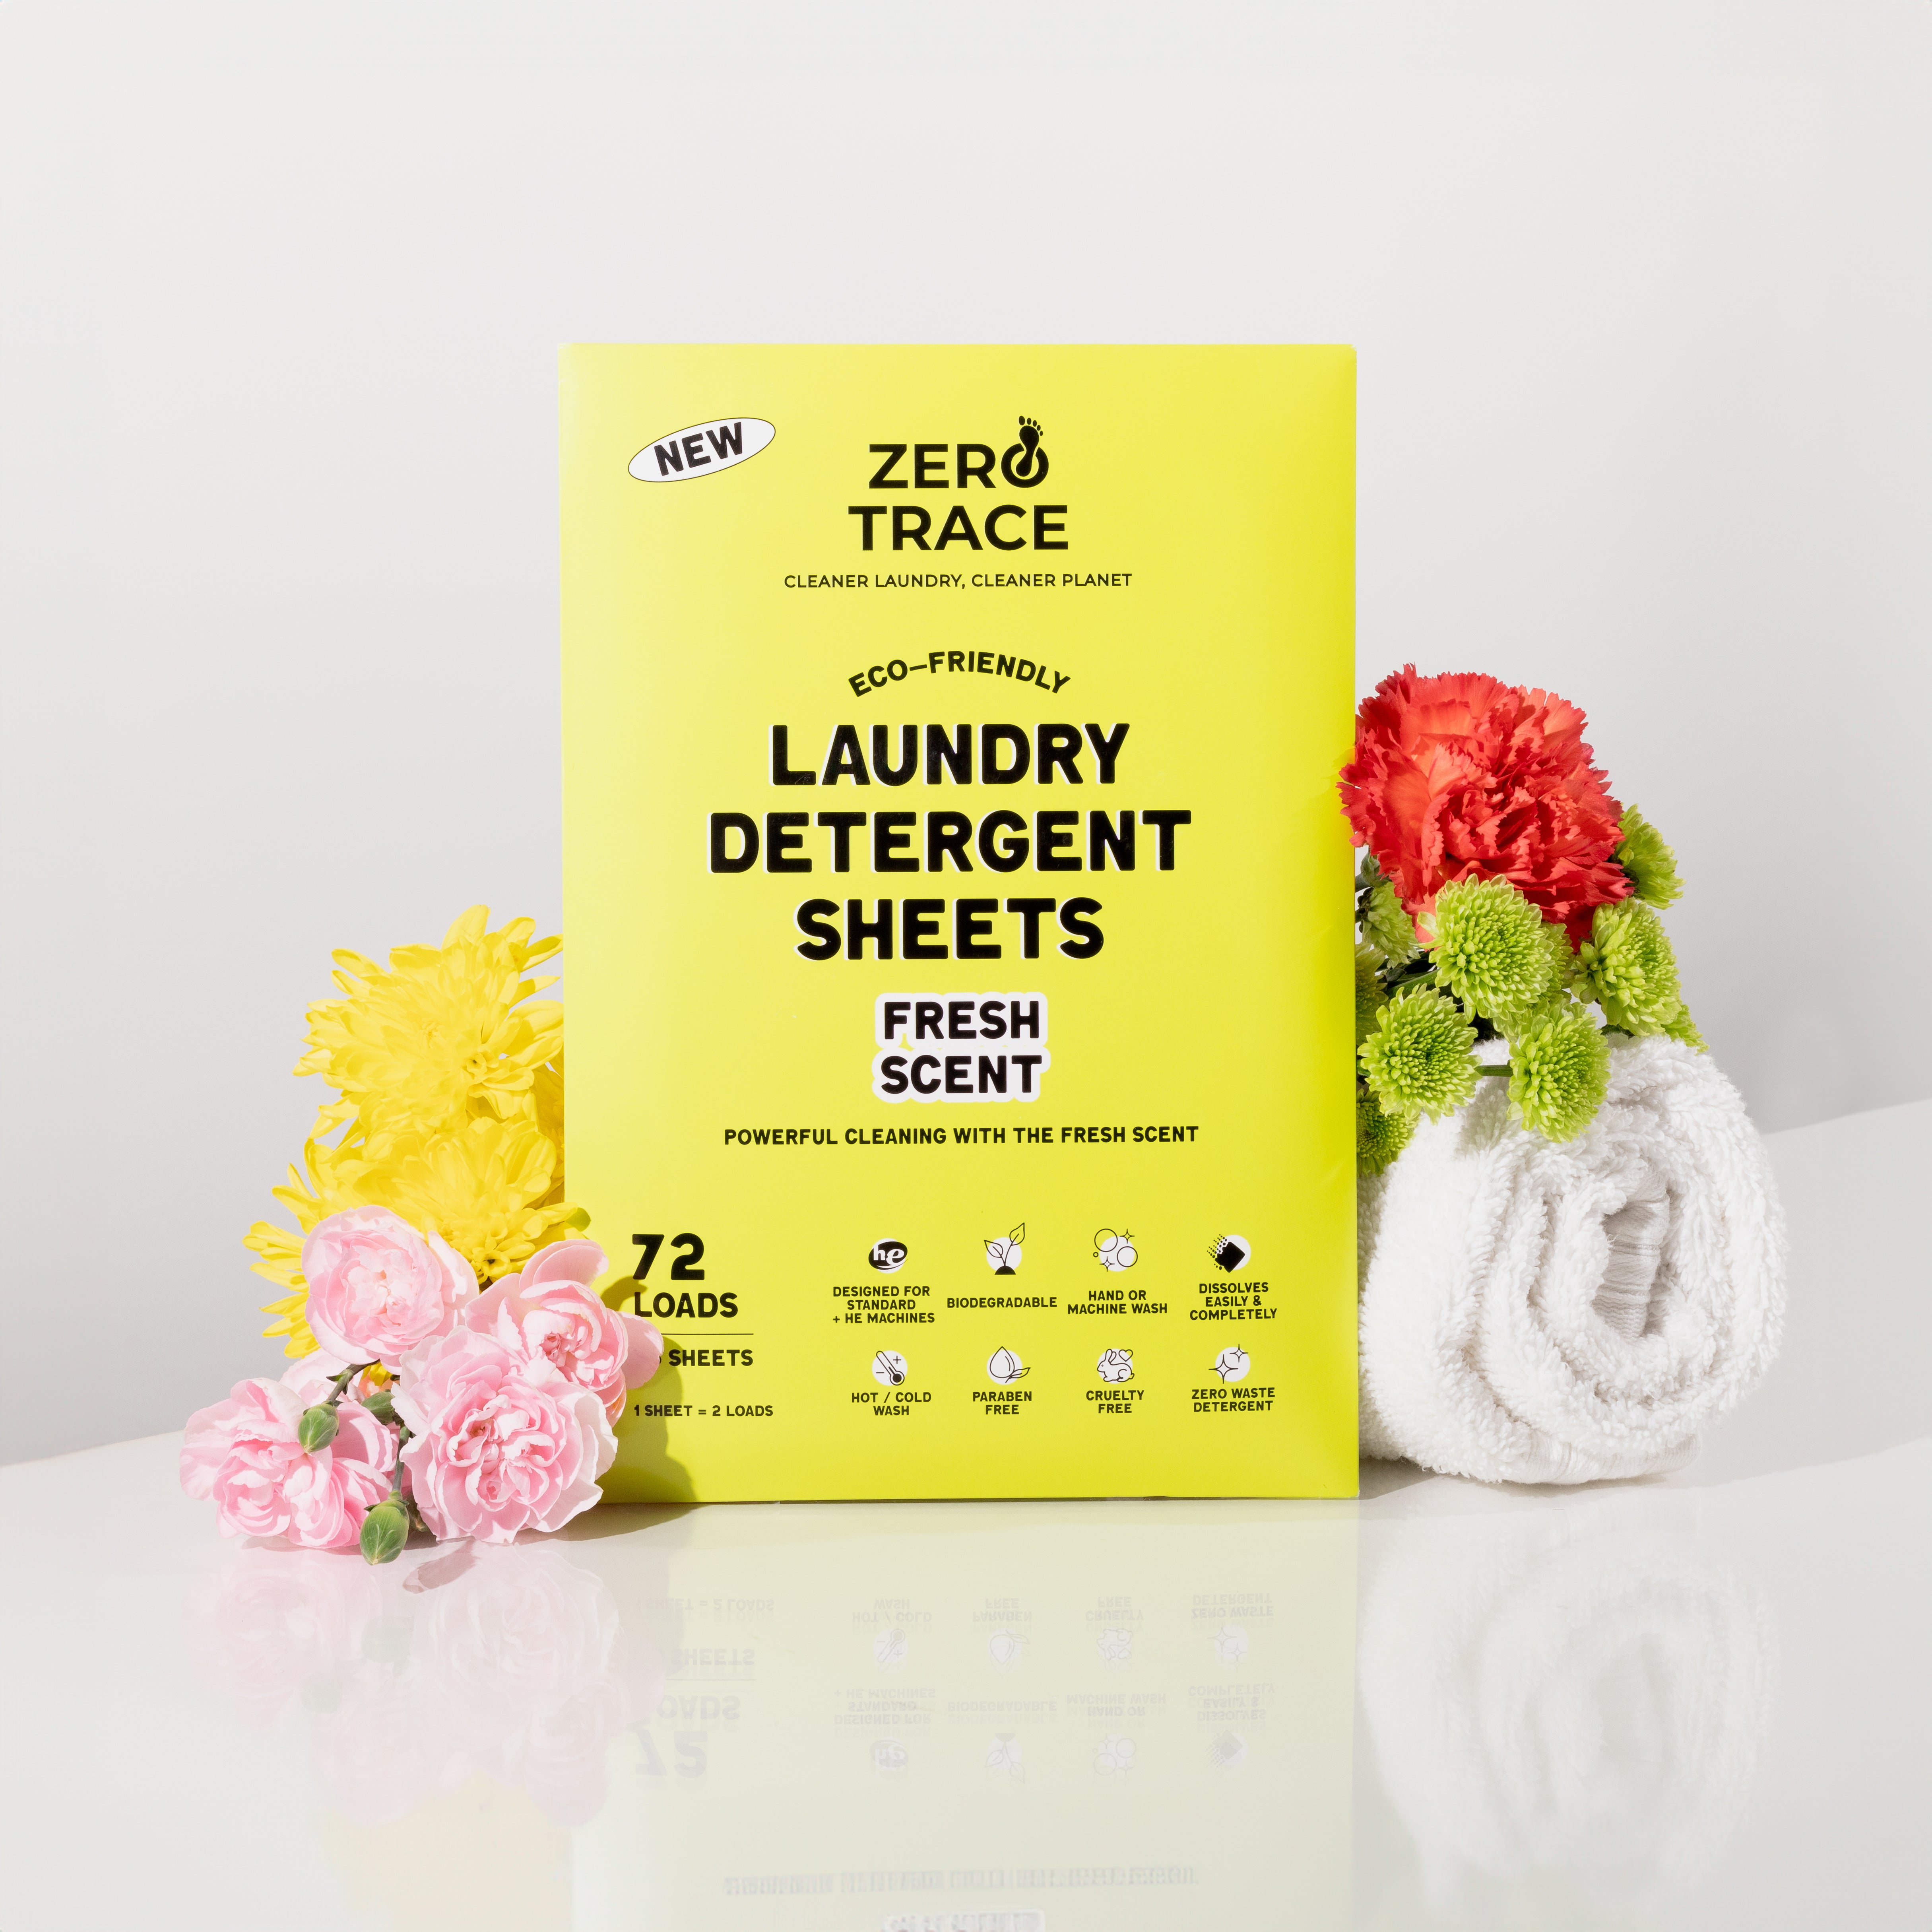 An eco-friendly Zero Trace Laundry Detergent Sheets that brightens clothes and leaves a pleasant scent of flowers.